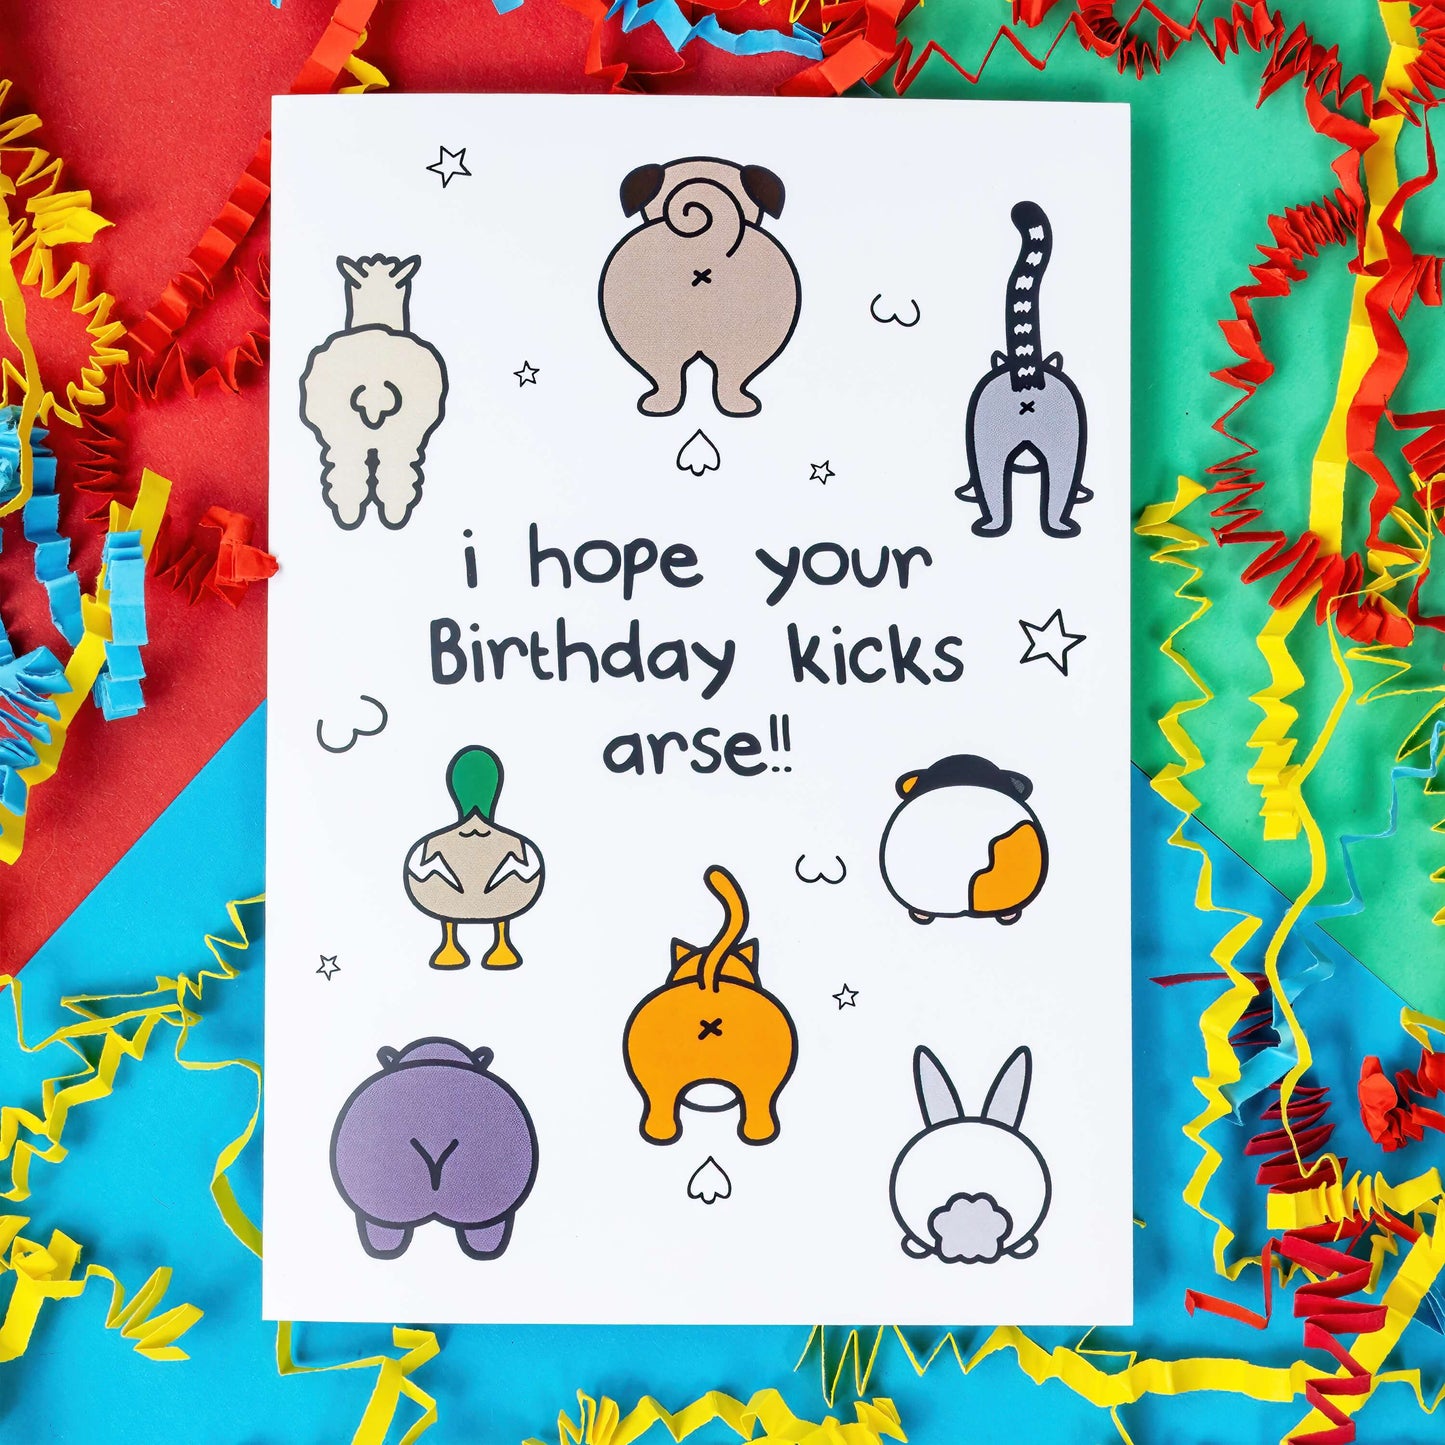 The I Hope Your Birthday Kicks Arse Card on red, blue and green card with red, yellow and blue crinkle card. The a6 white cheeky birthday card with various animal illustrations with their backs to the cameras showing their bums. 'I hope your Birthday kicks arse!!' is written in black on the card.